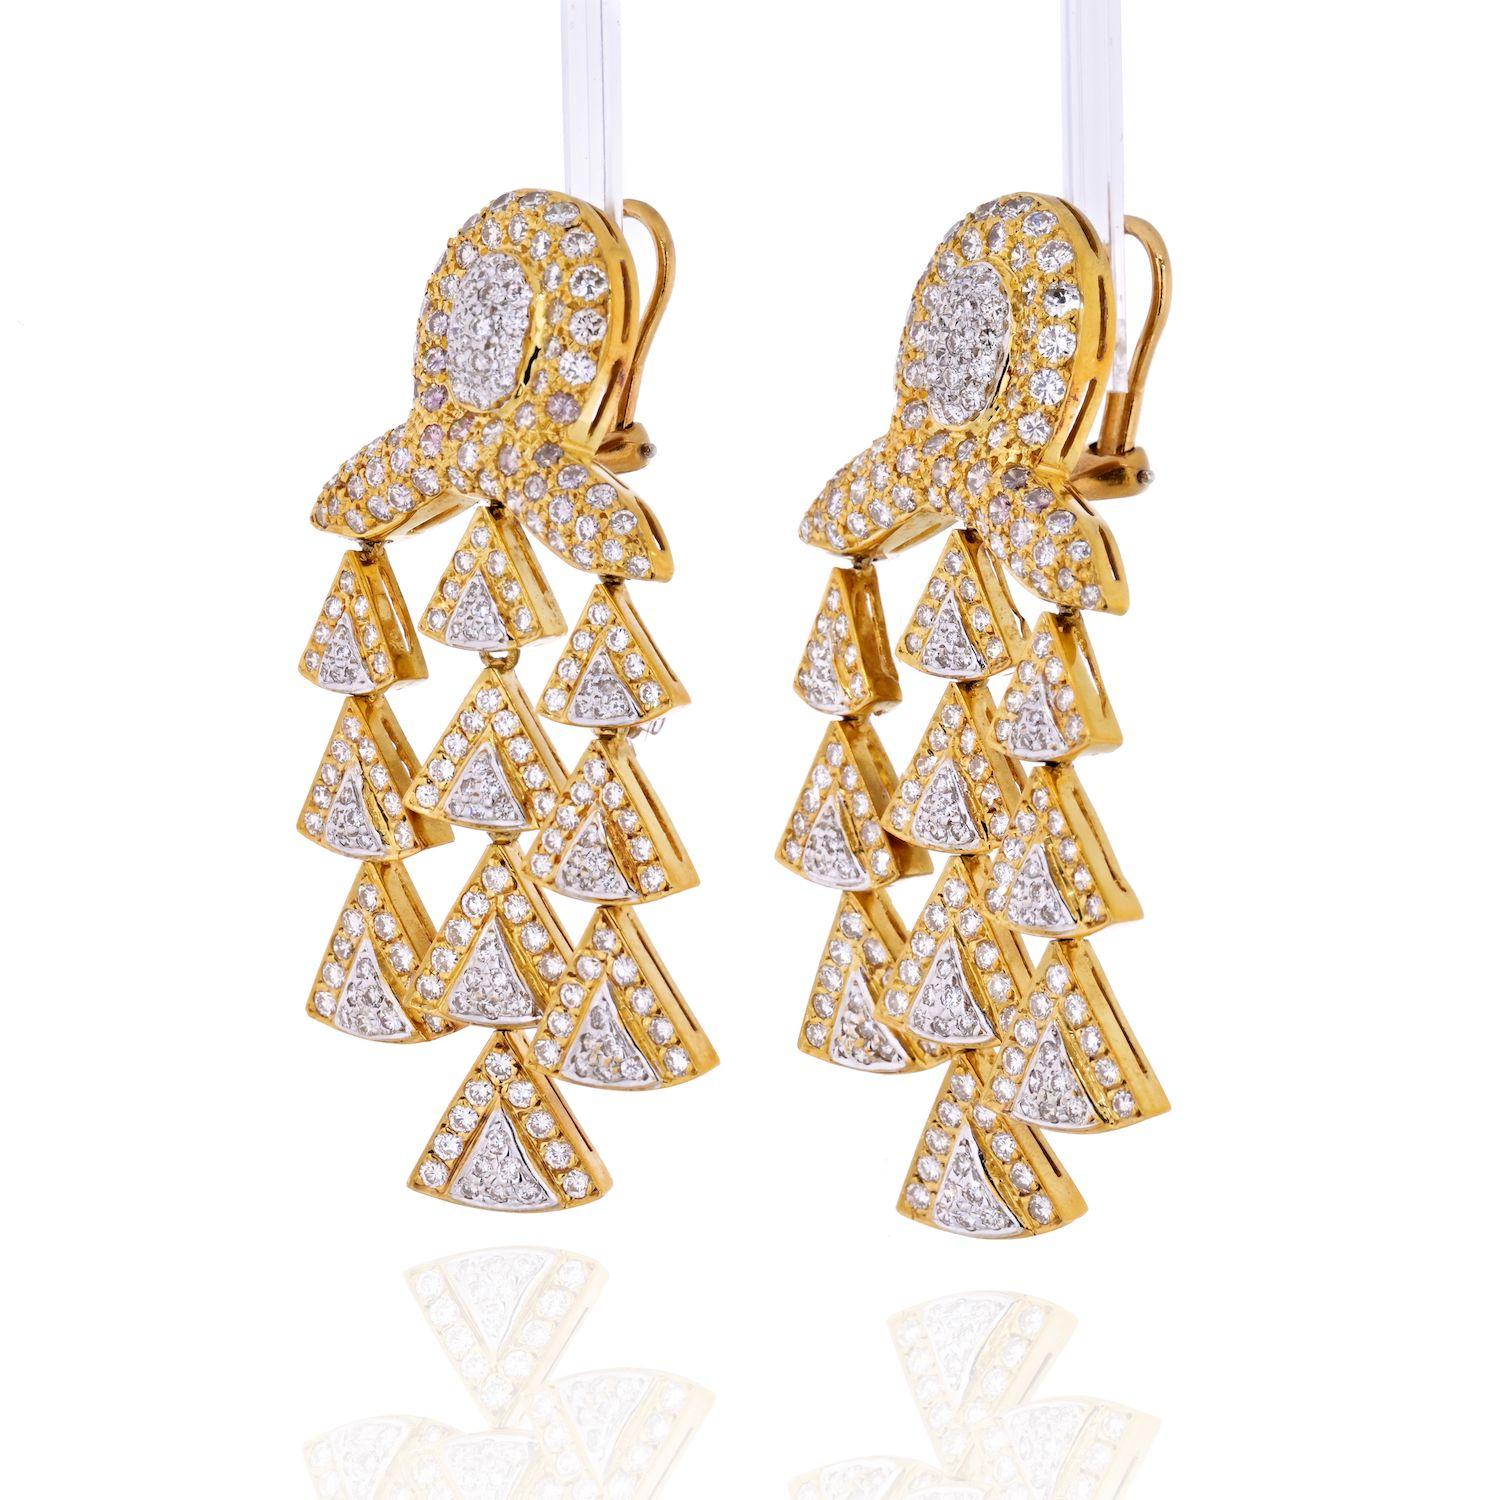 In short, these chandelier diamond earrings are like a full gift of fine jewelry in a pair. Blend of yellow gold and white diamonds gives these earrings a true Californian vibe, sexy shimmer and timeless style that will be perfect for a gold theme